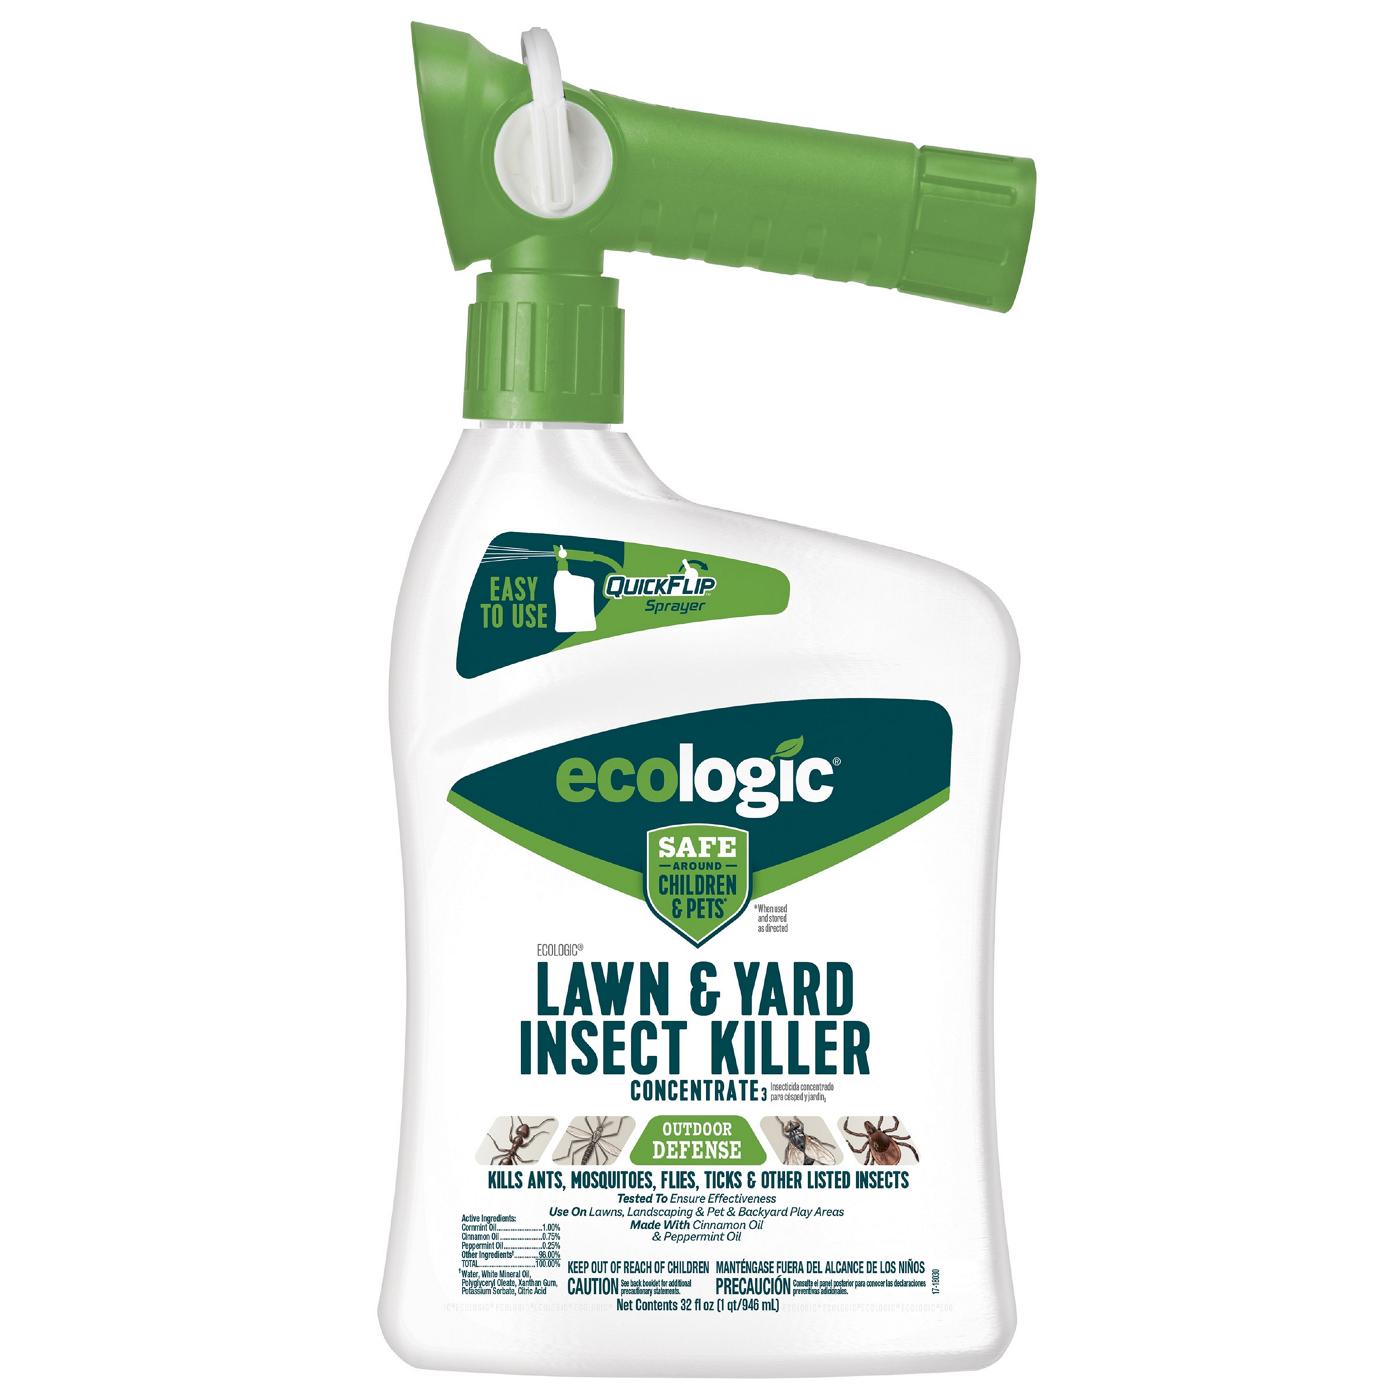 EcoLogic Lawn & Yard Ready-To-Spray Insect Killer Concentrate3; image 1 of 2